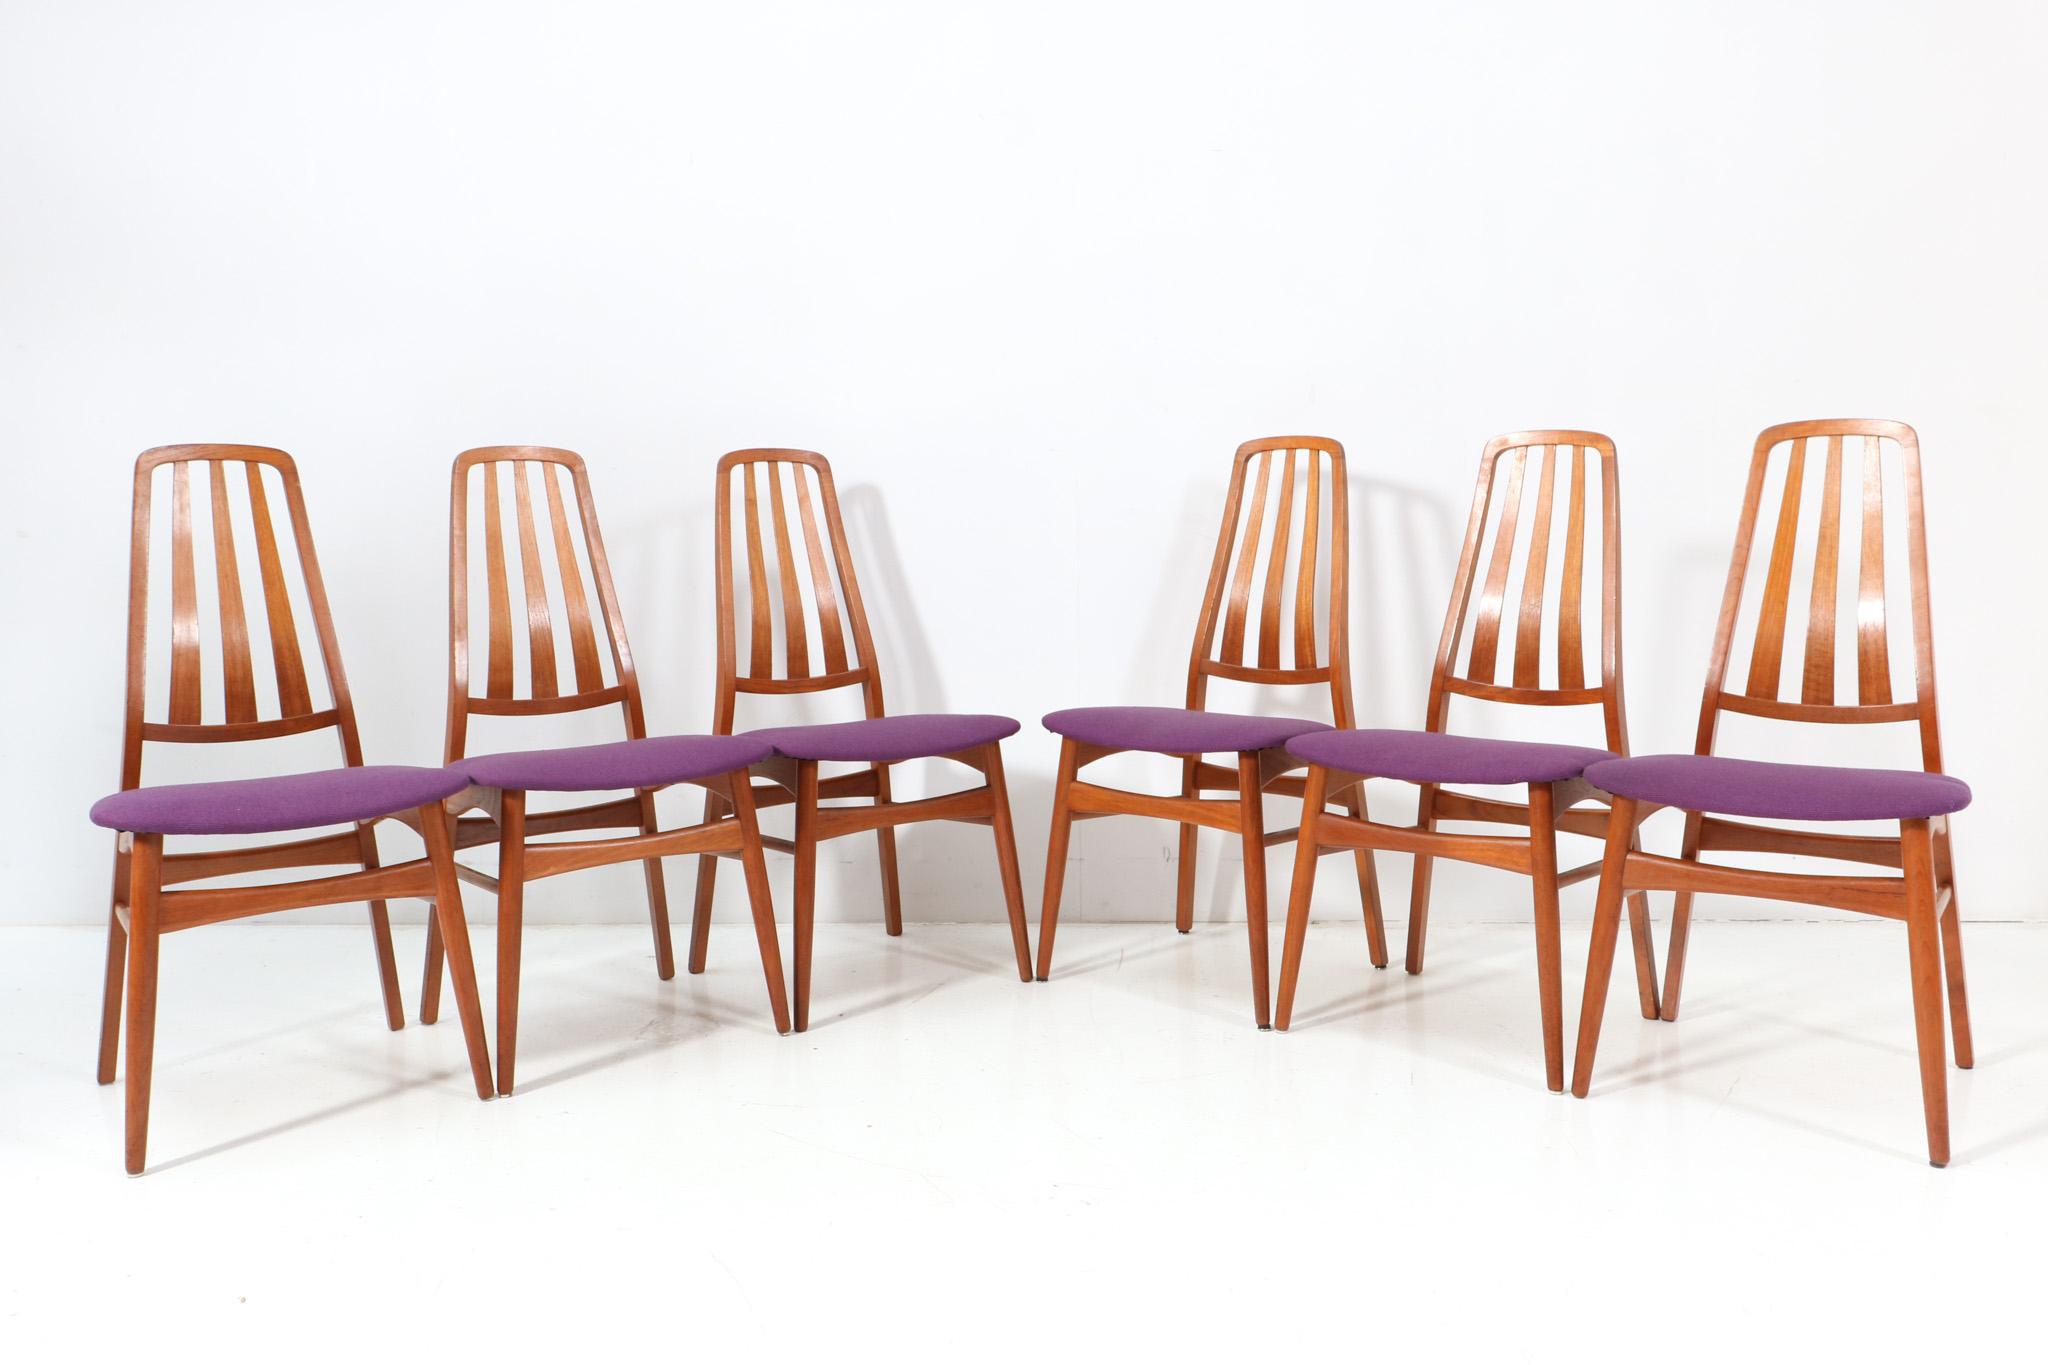 Stunning set of six Mid-Century Modern dining room chairs.
Marked with original label IMHA.
Striking Danish design from the 1960s.
Solid teak high back frames.
Seats are re-upholstered with purple fabric.
This wonderful set of six Mid-Century